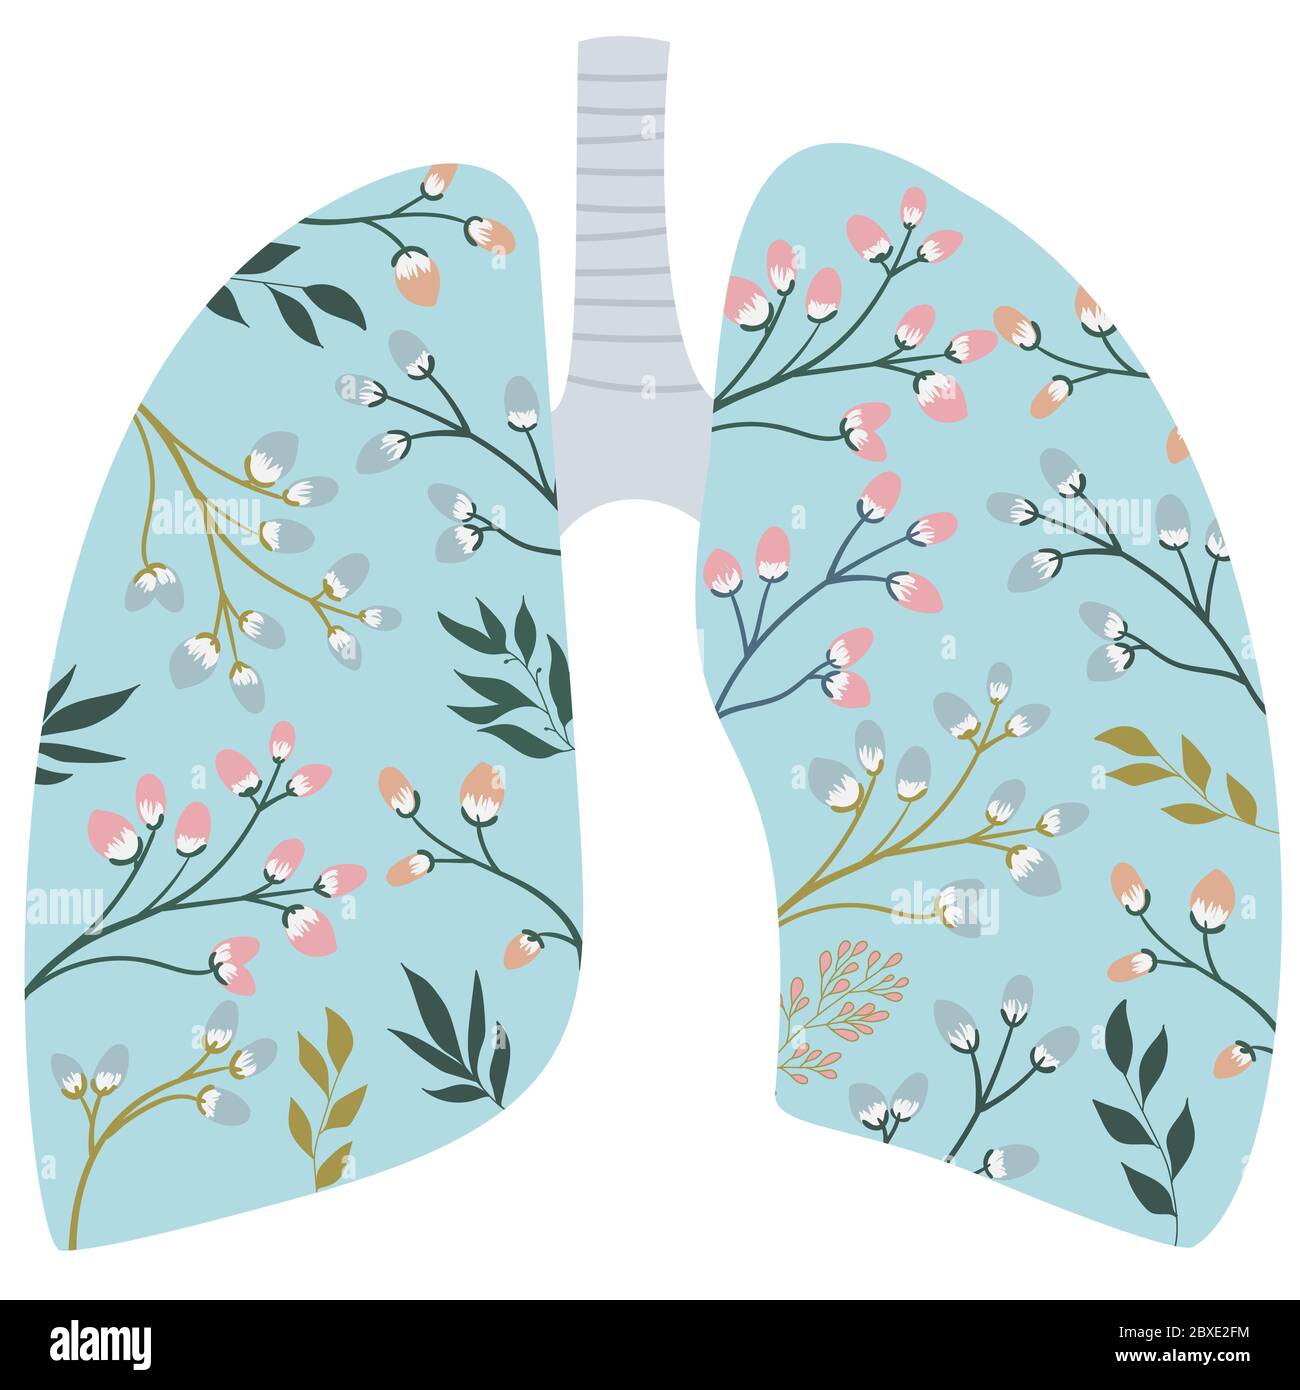 Blooming, healthy human lungs. World-wide day against pneumonia. The fight against tuberculosis in medicine. Smoker's lungs and healthy. Blue lungs in Stock Vector